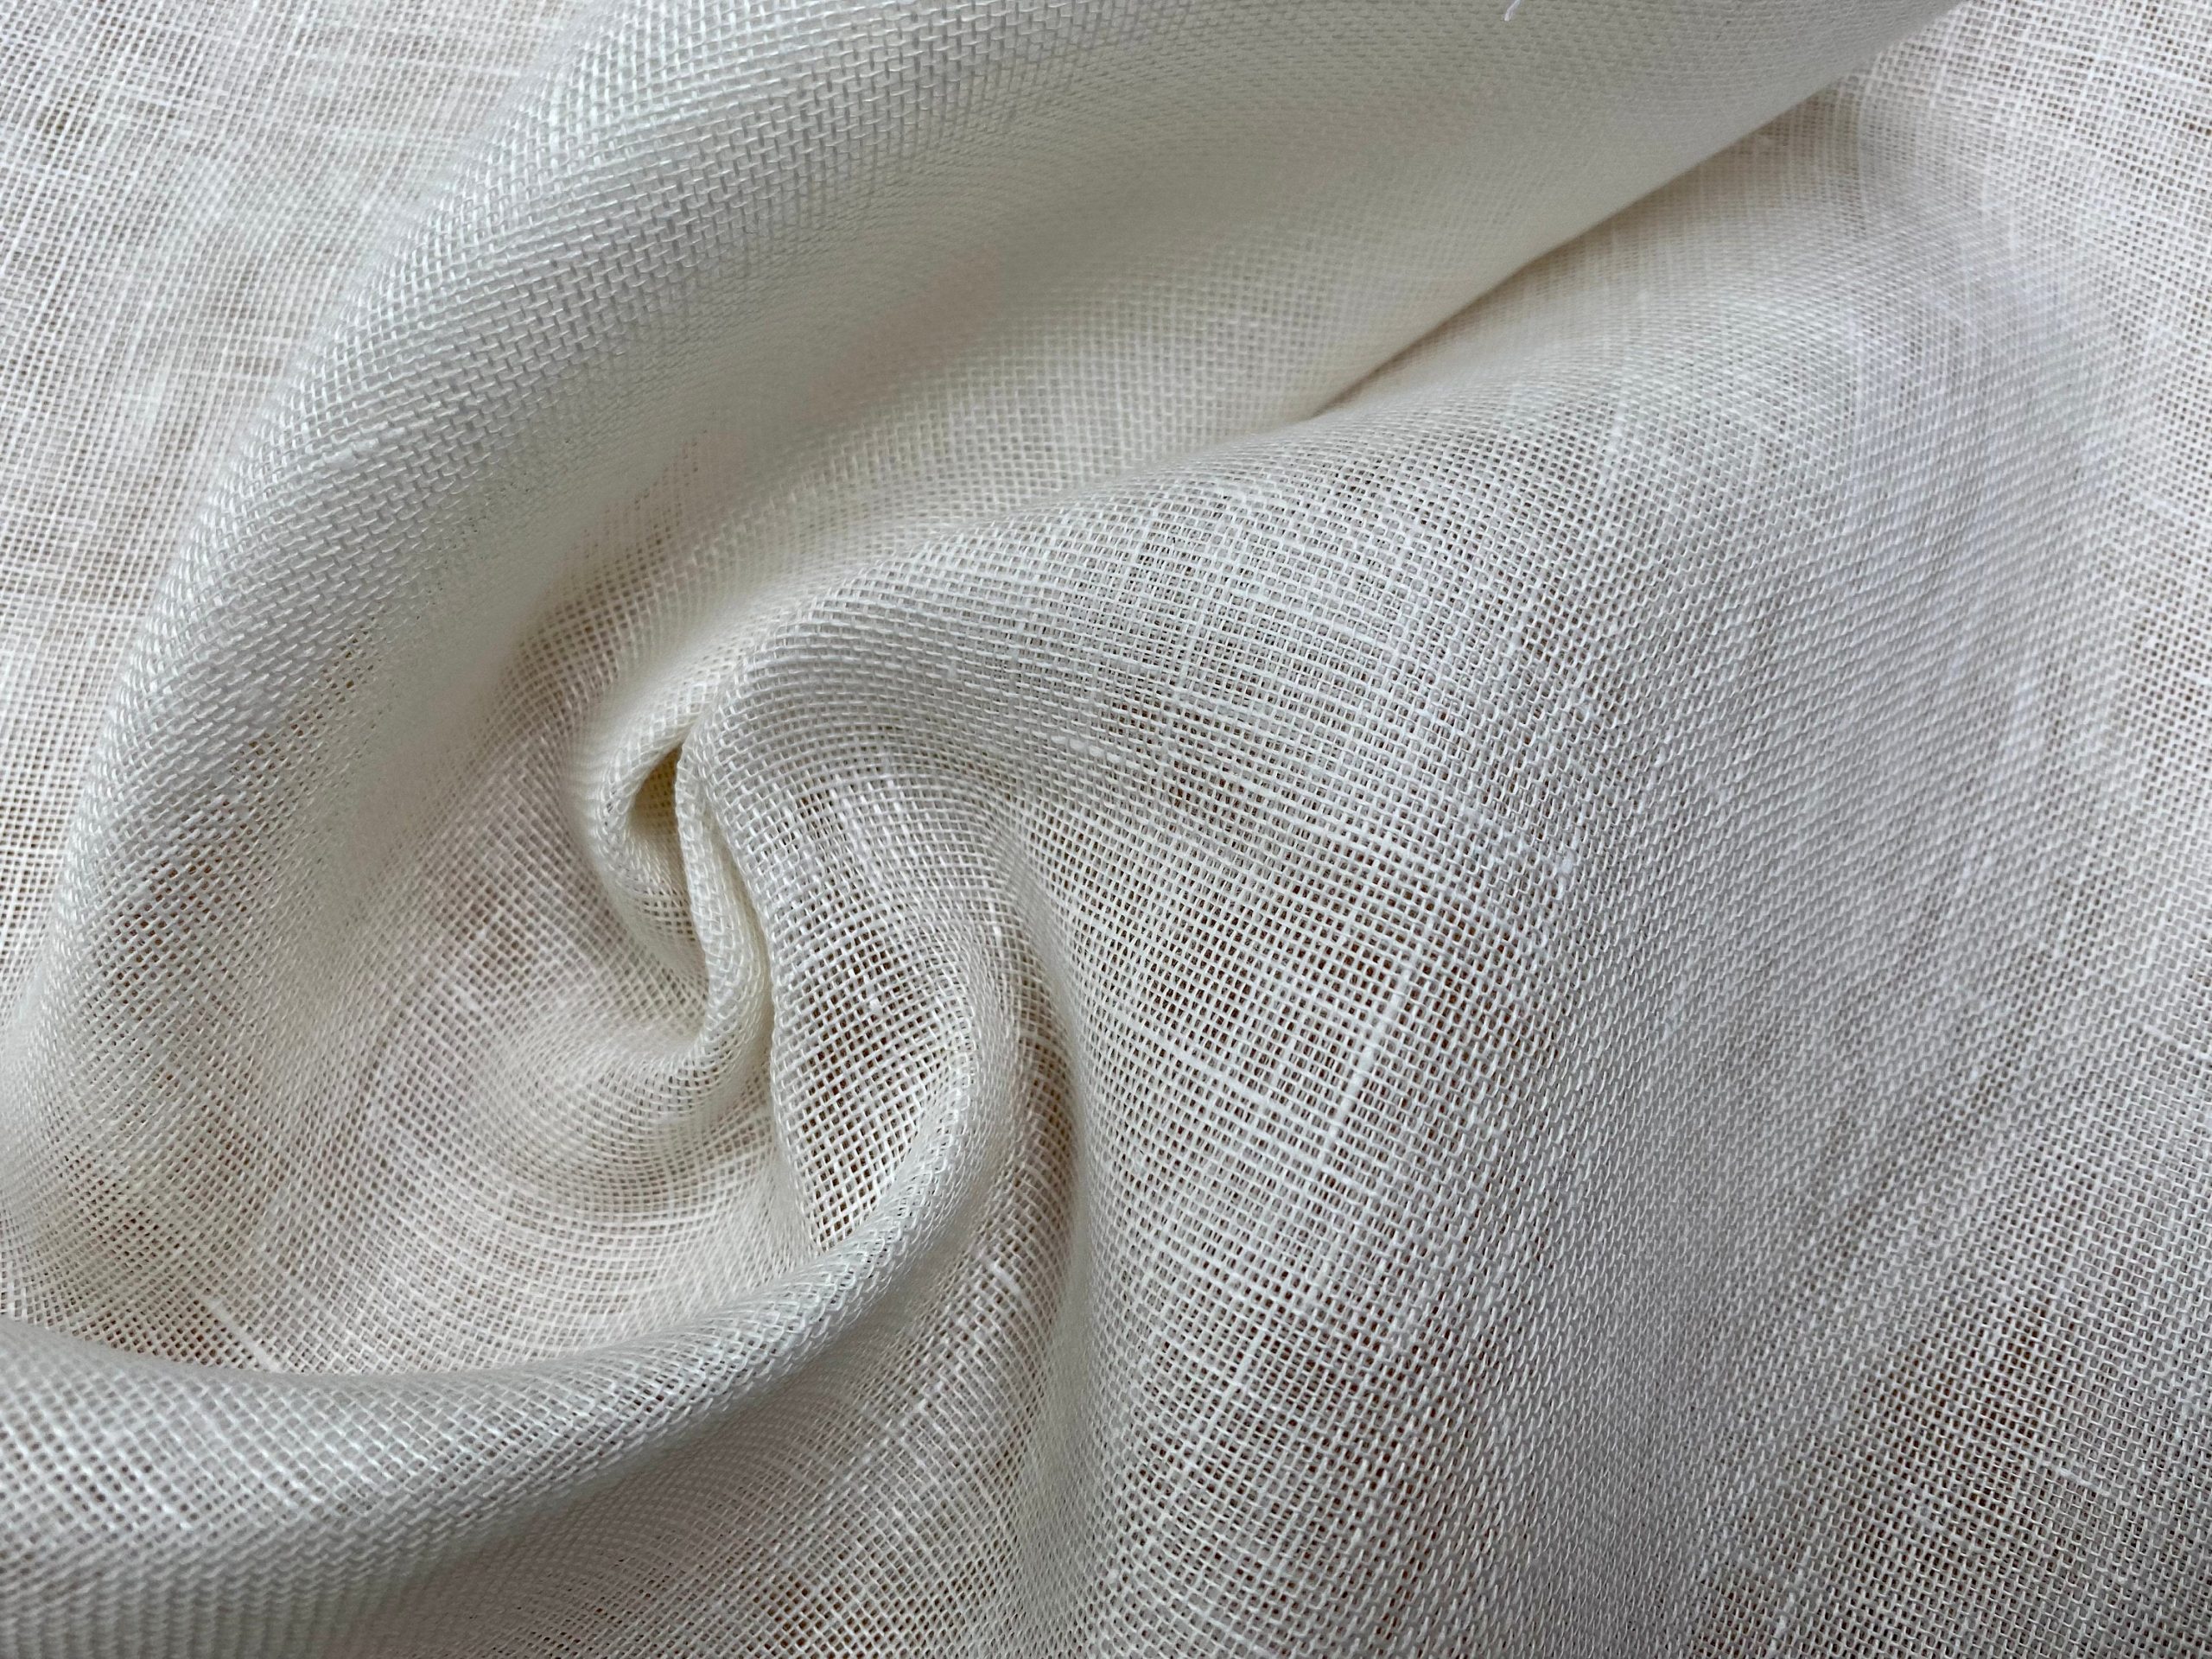 https://lushfabric.com/wp-content/uploads/2021/07/extra-wide-100-linen-fabric-soft-linen-material-for-home-decor-curtains-clothes-118-300cm-wide-plain-cream-6103fe7f-scaled.jpg